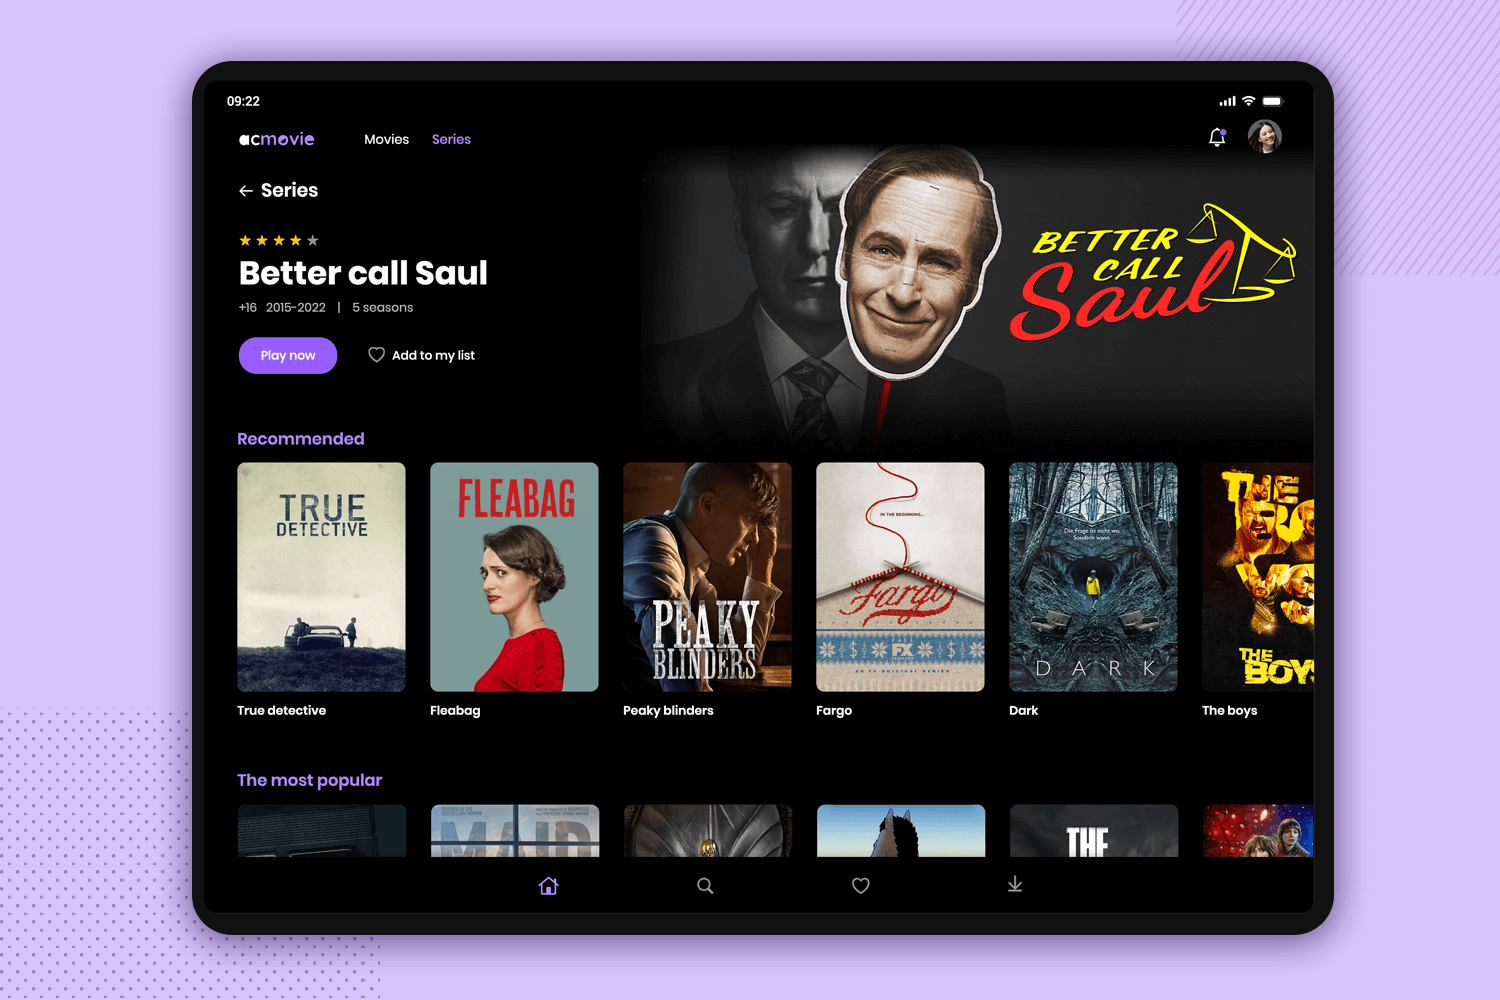 Tablet app mockup for a streaming service with a dark-themed interface.